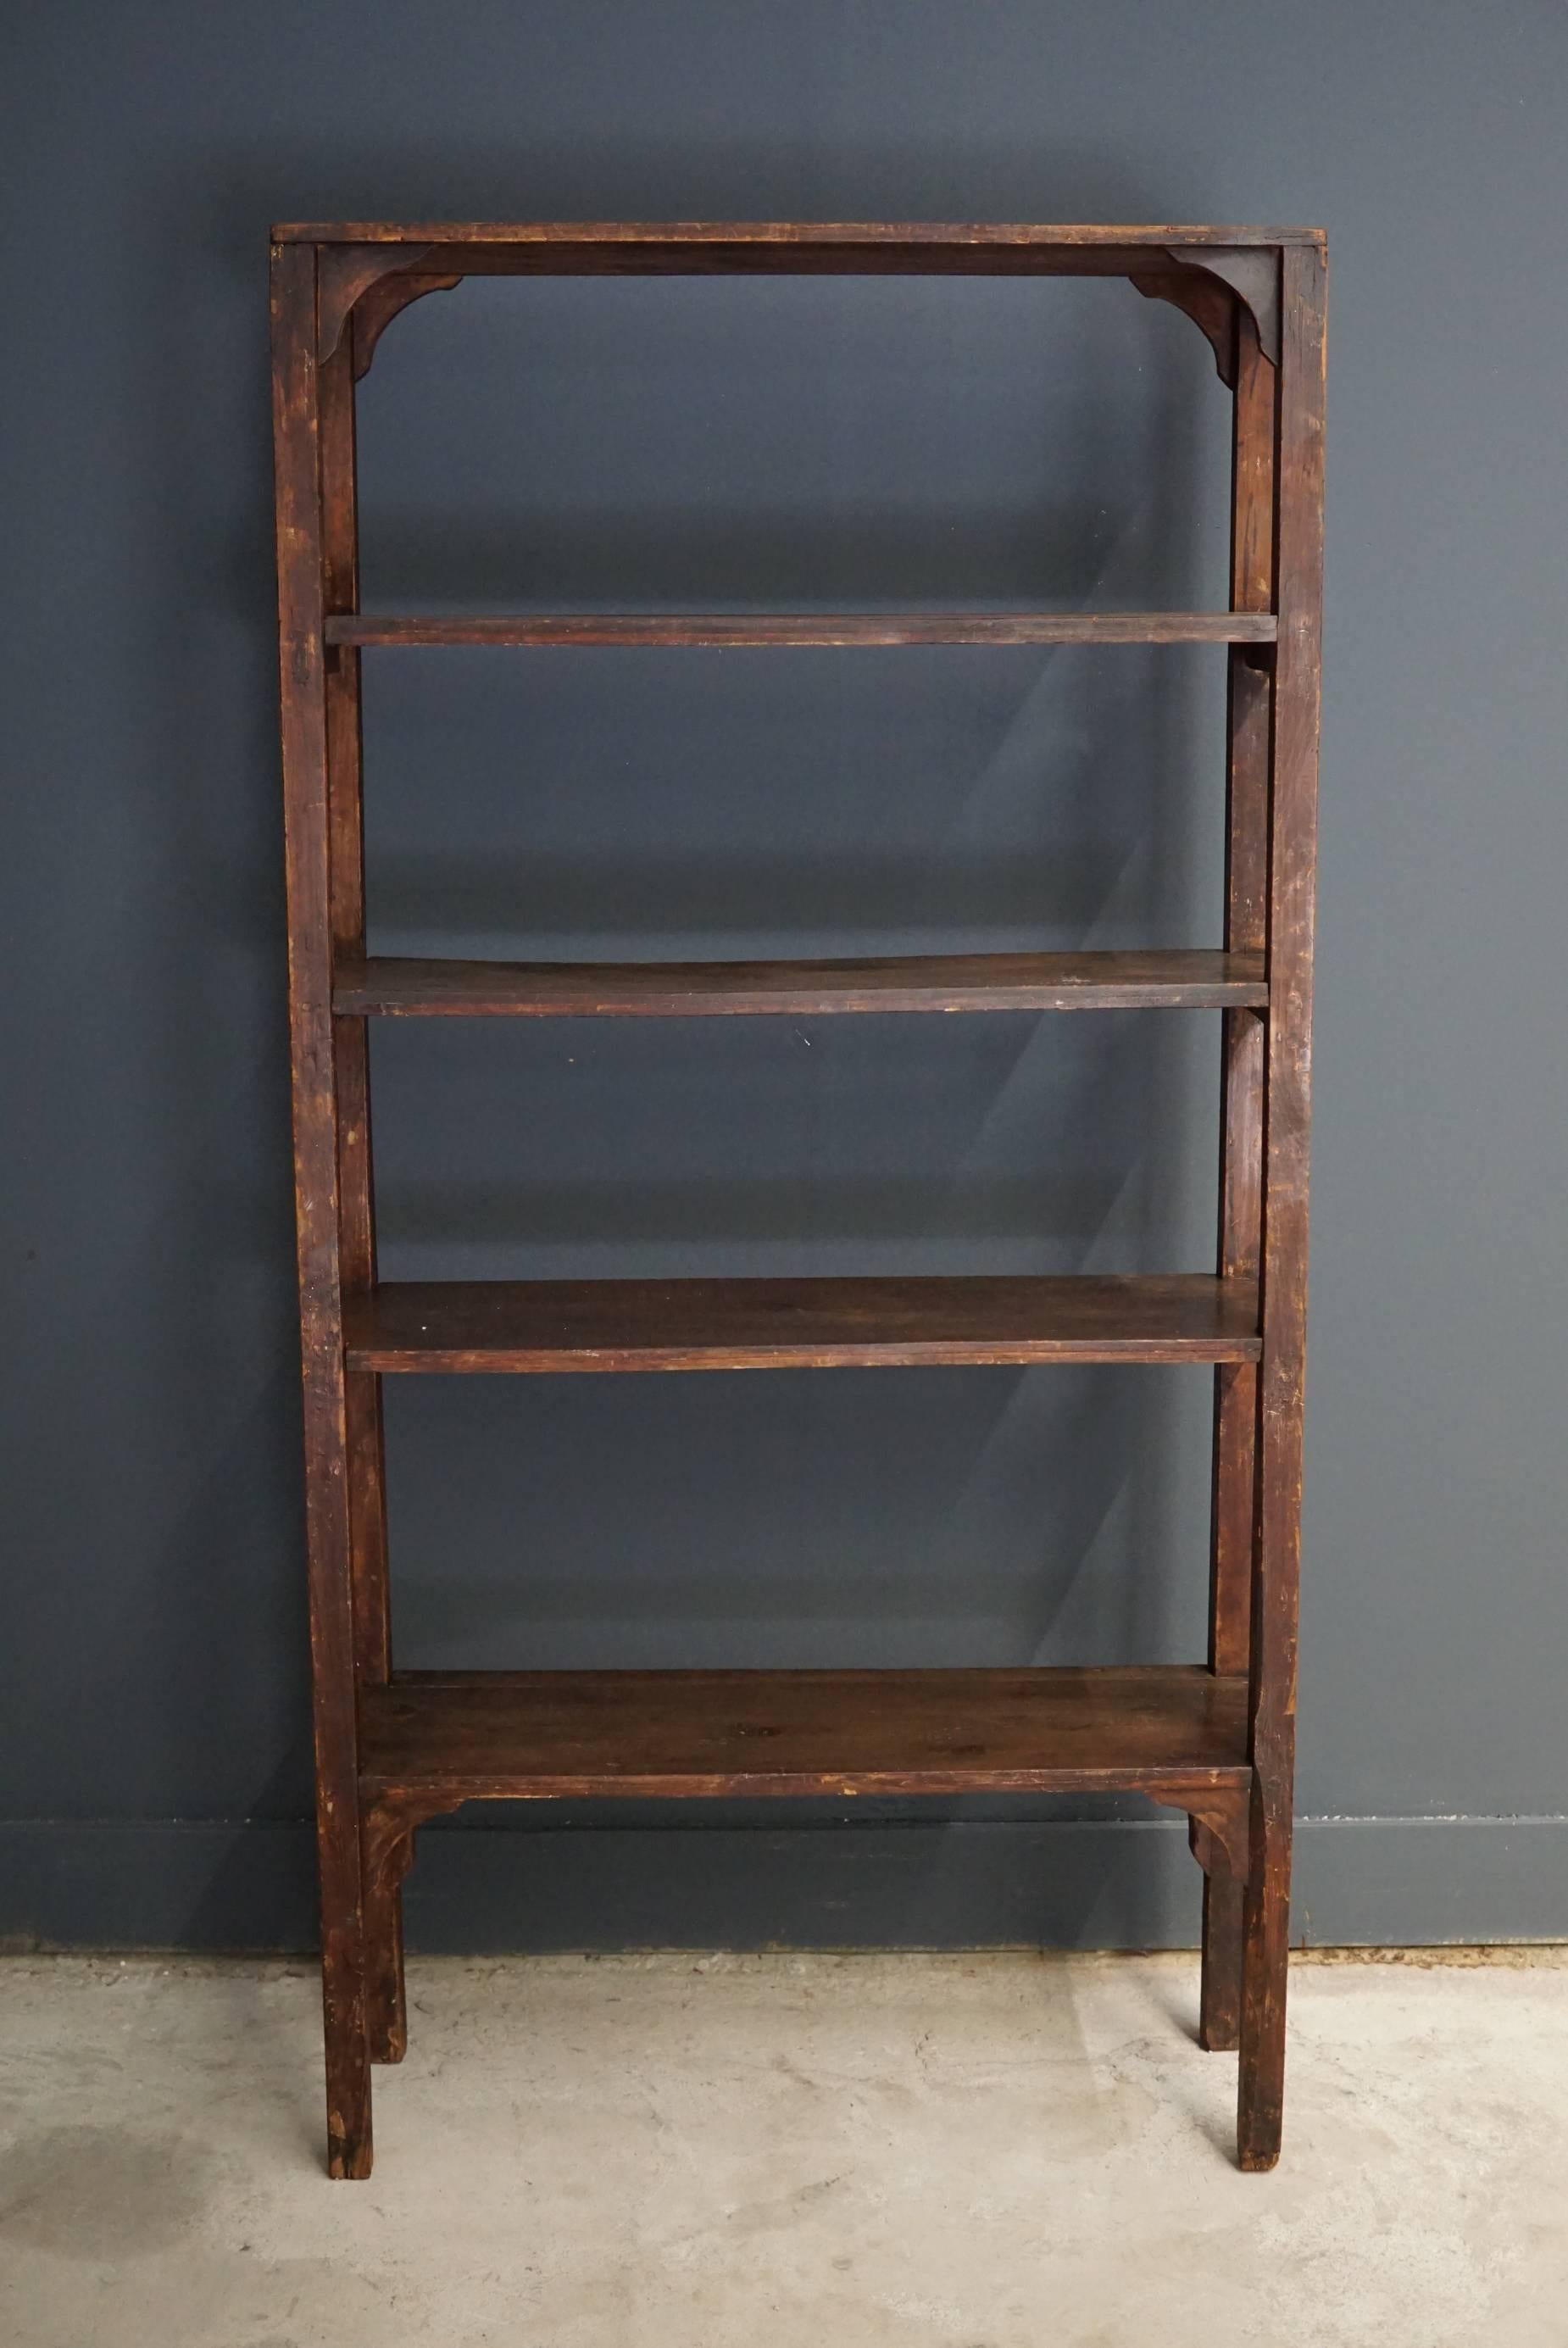 This shelving unit was designed and made, circa 1950 in France. It is in a good vintage condition with signs of use.